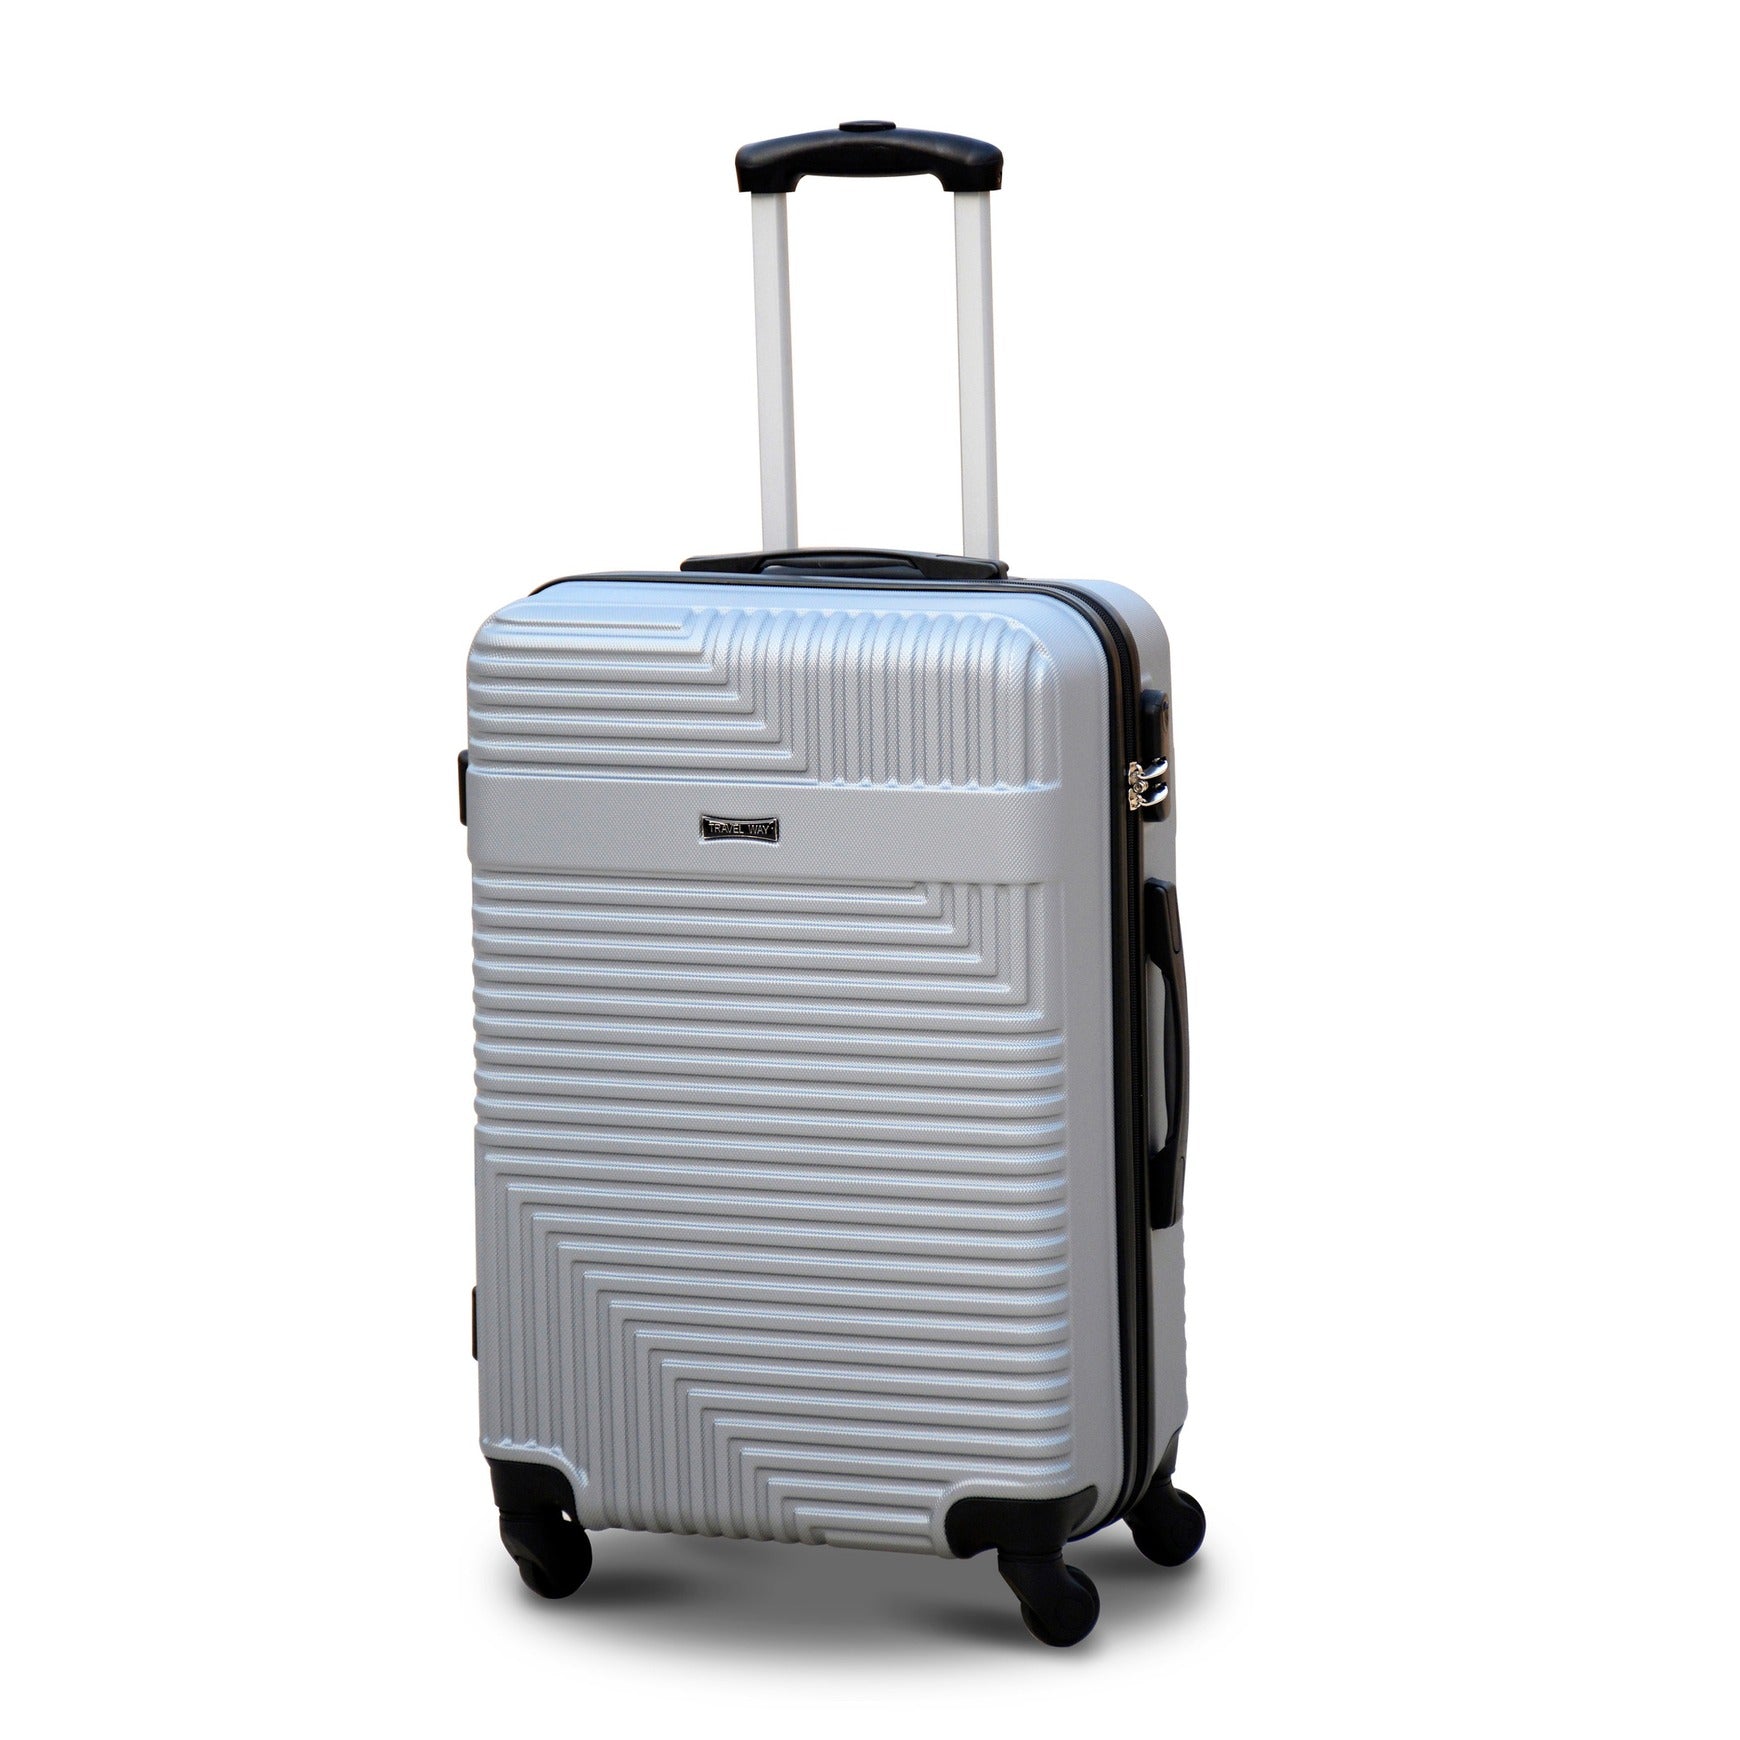 3 Piece Set 20" 24" 28 Inches Silver Colour Travel Way ABS Luggage lightweight Hard Case Trolley Bag Zaappy.com